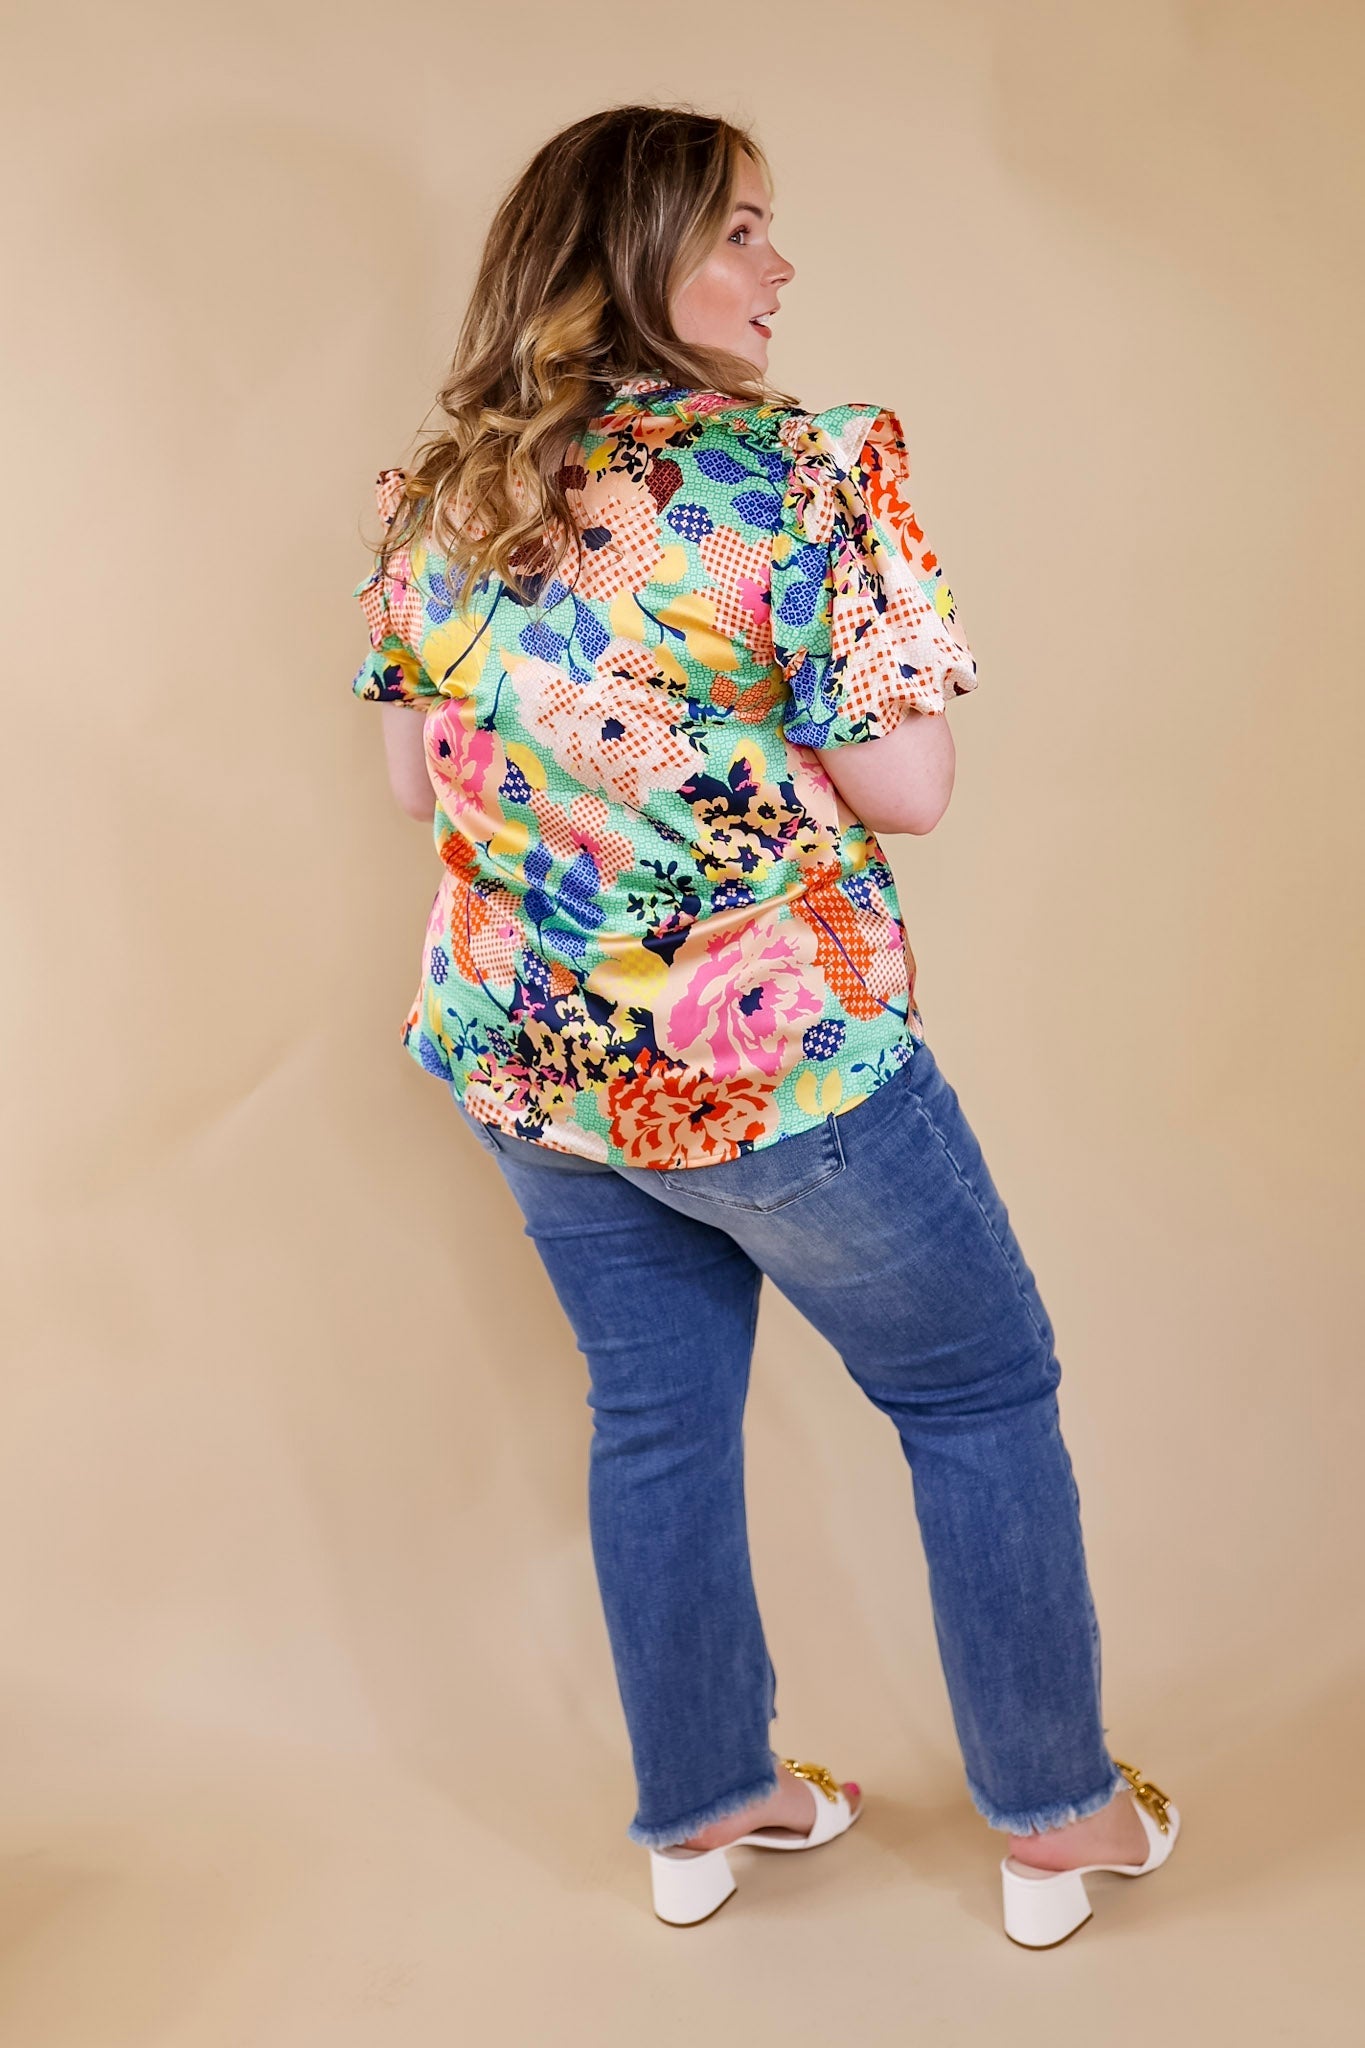 Malibu Villa Floral Print Top with Keyhole and Tie Neckline in Green Mix - Giddy Up Glamour Boutique